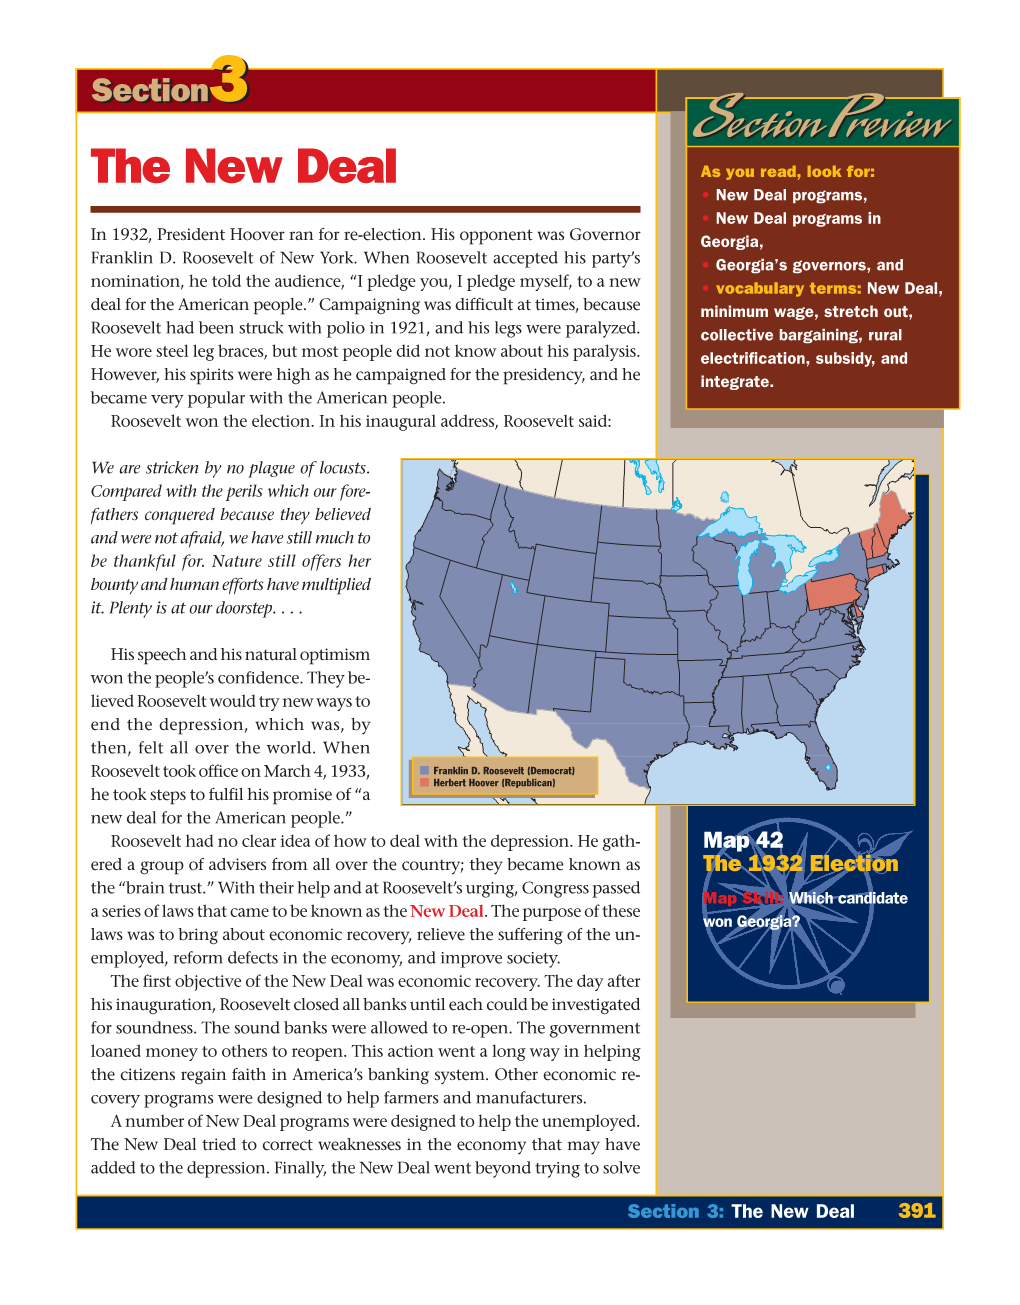 The New Deal Section Preview Section Preview